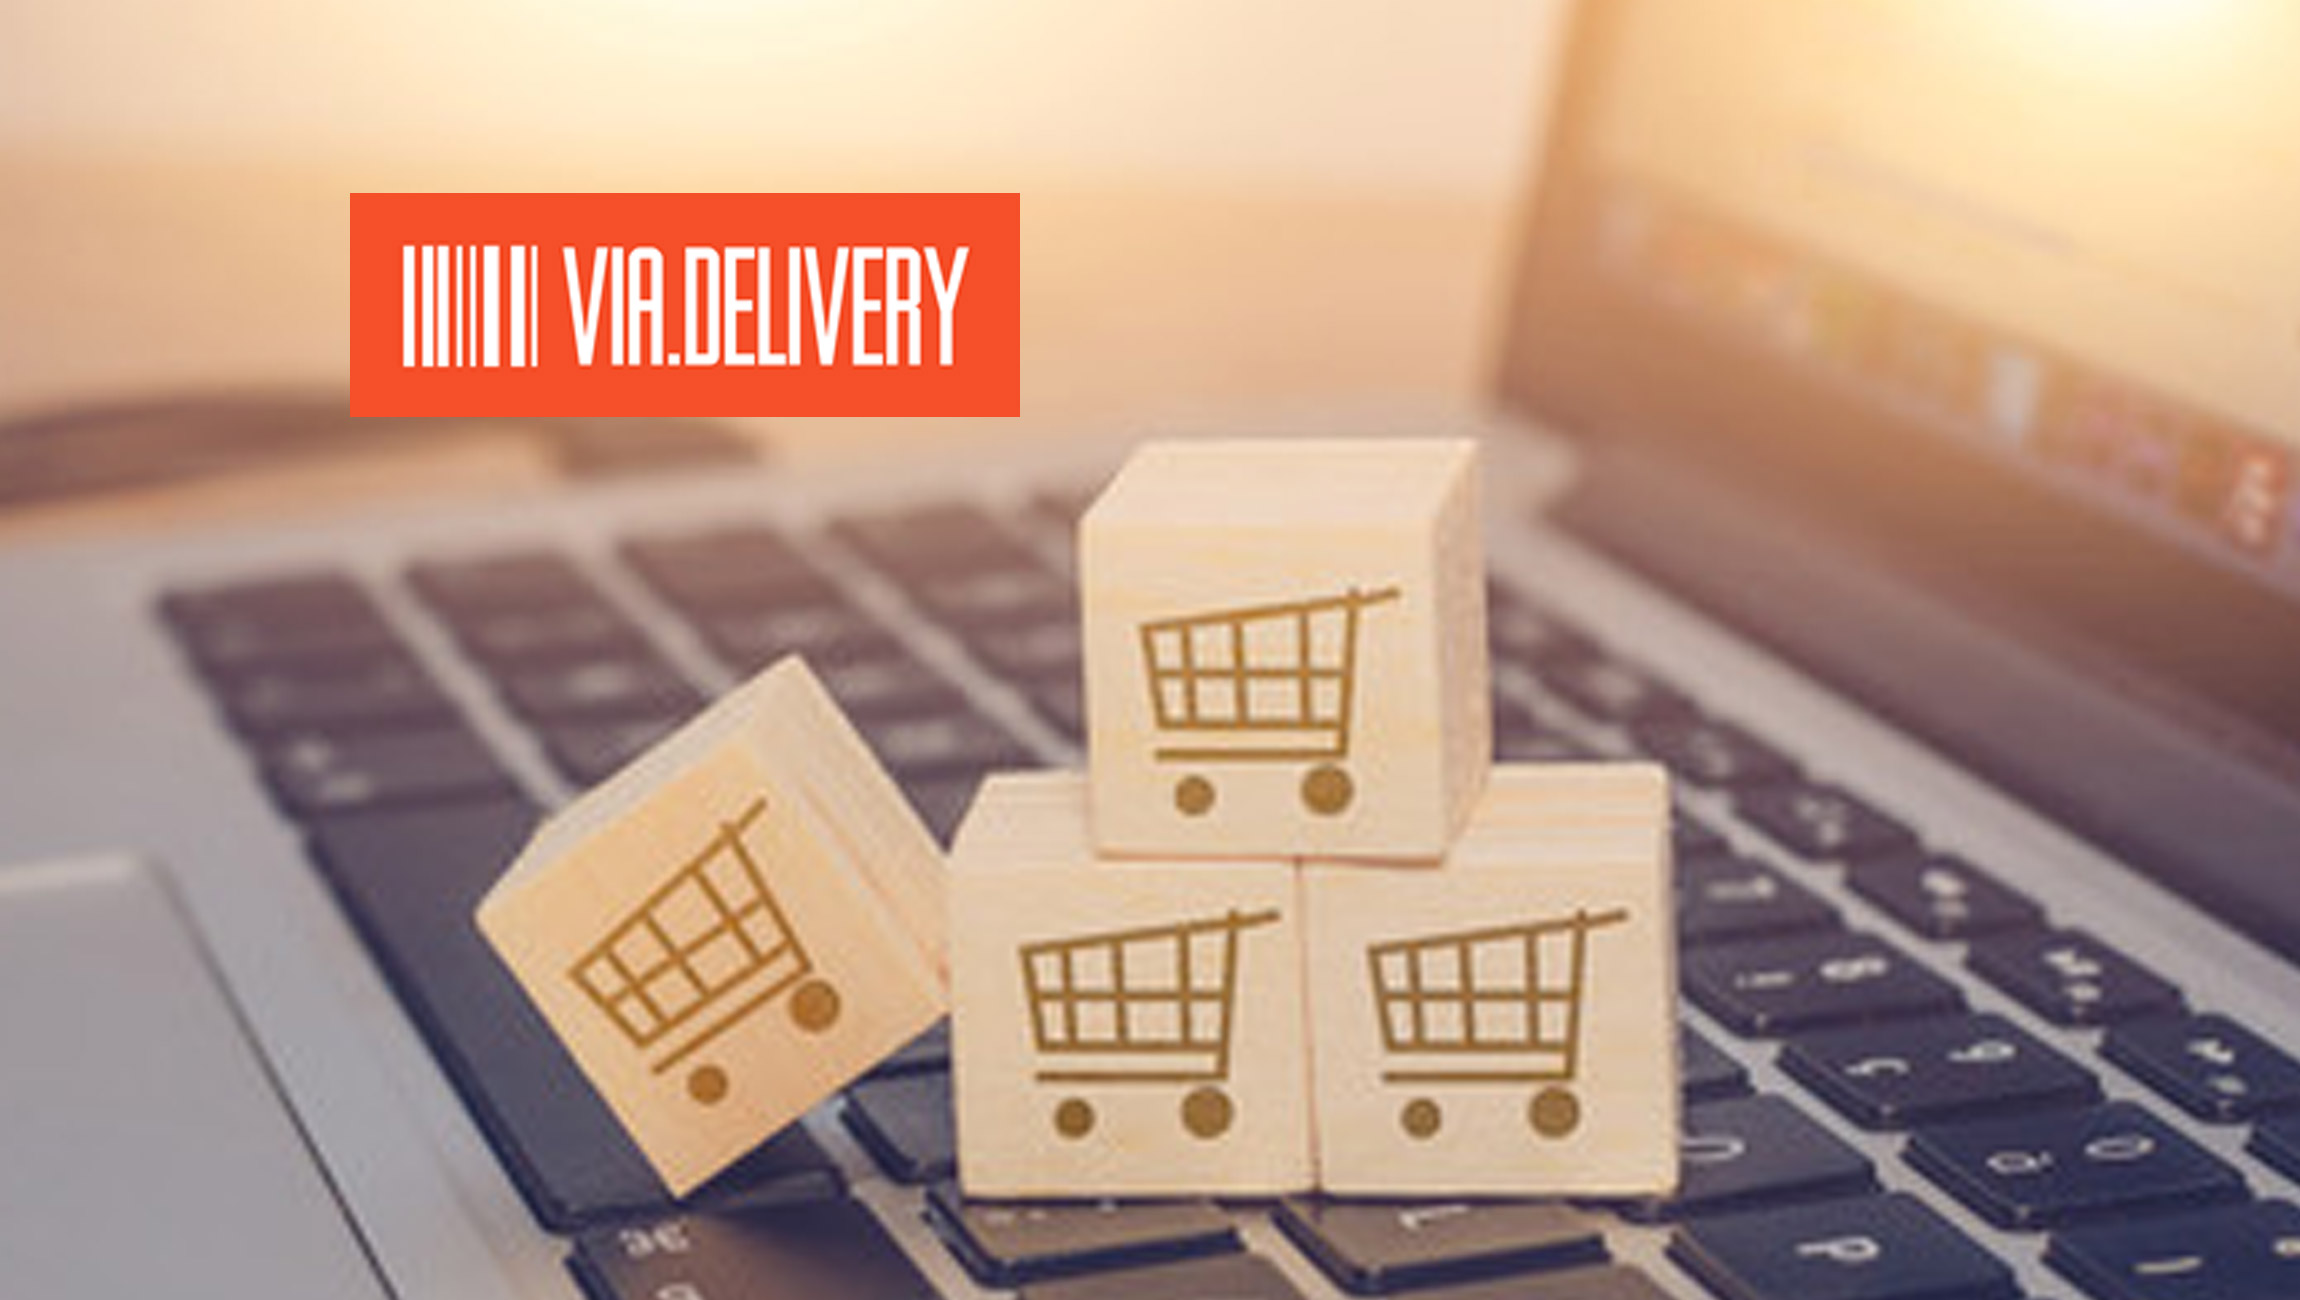 Via.Delivery-Introduces-Buy-Online_-Pickup-Anywhere-(BOPA)-as-a-New-Delivery-Alternative-for-E-Commerce-Shoppers-in-the-U.S.